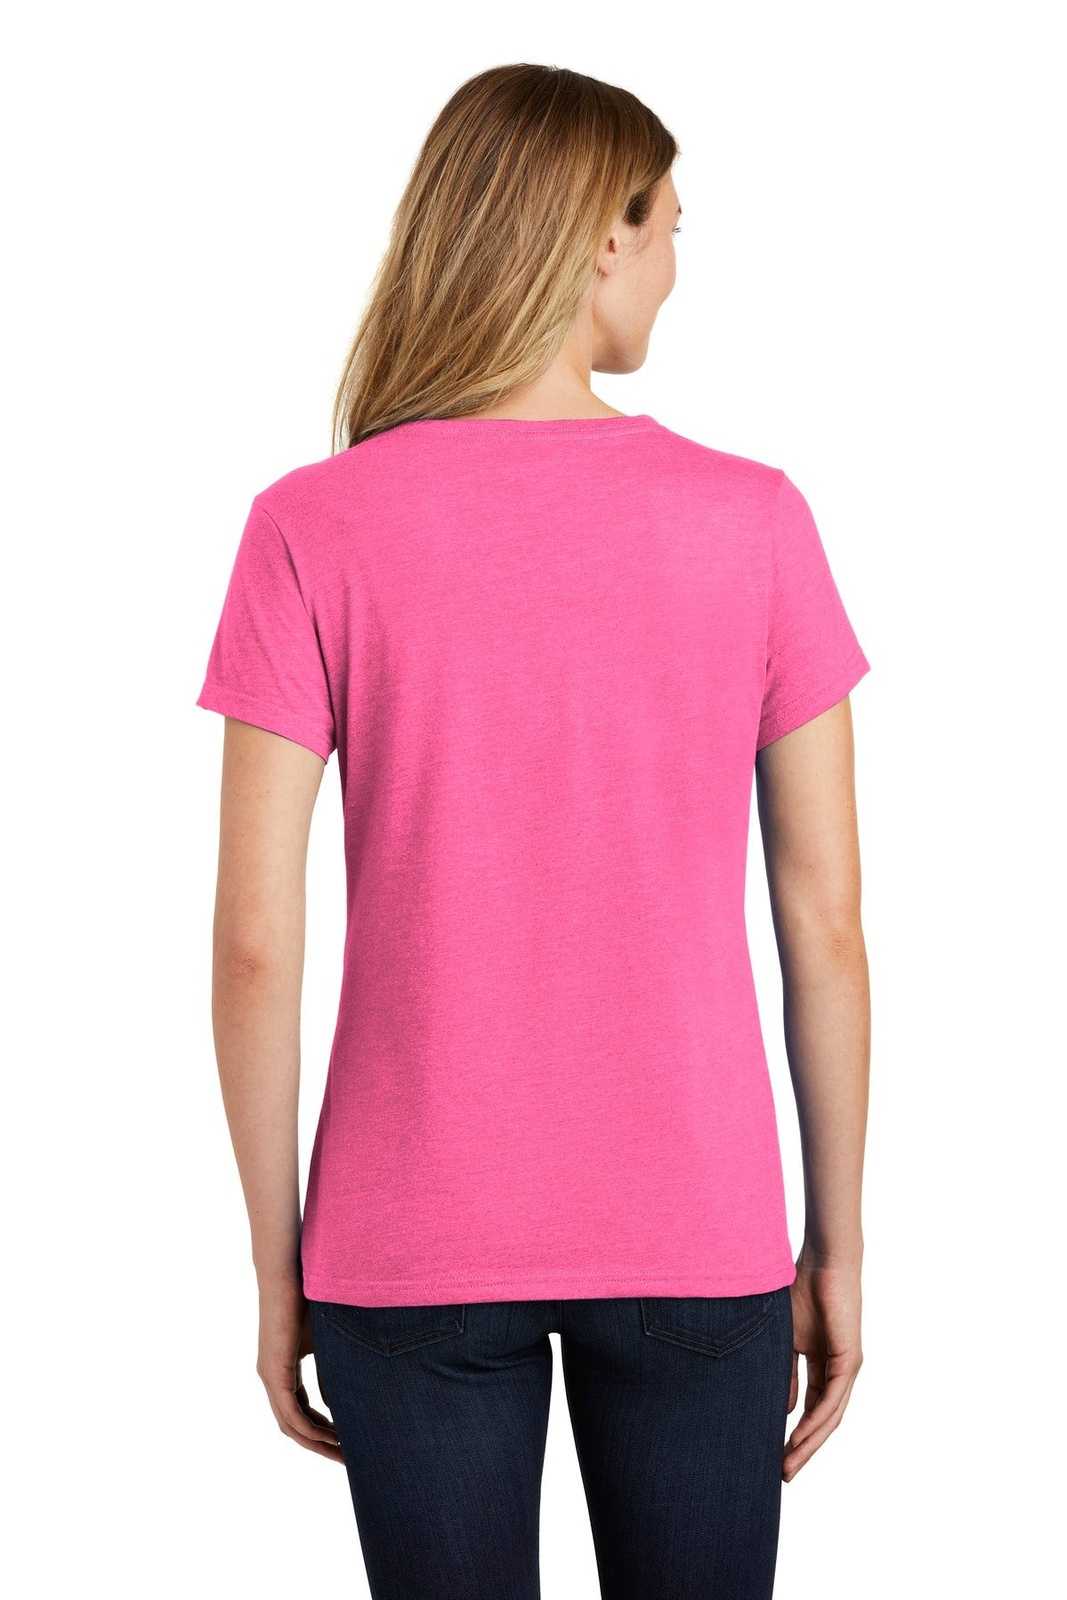 Port & Company LPC455V Ladies Fan Favorite Blend V-Neck Tee - Neon Pink Heather - HIT a Double - 1